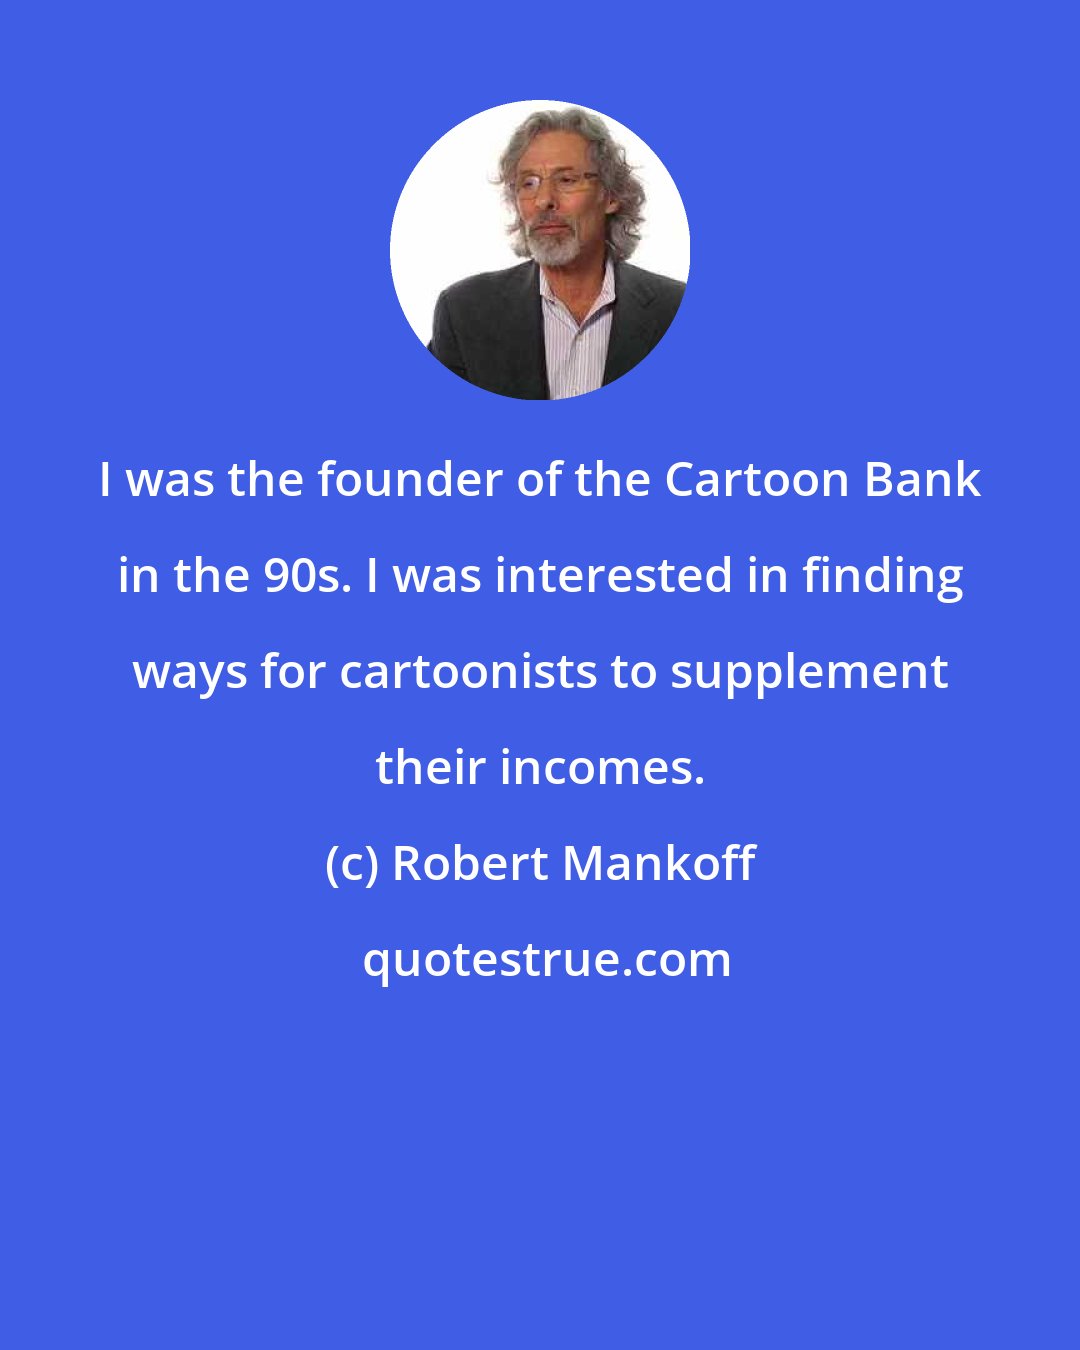 Robert Mankoff: I was the founder of the Cartoon Bank in the 90s. I was interested in finding ways for cartoonists to supplement their incomes.